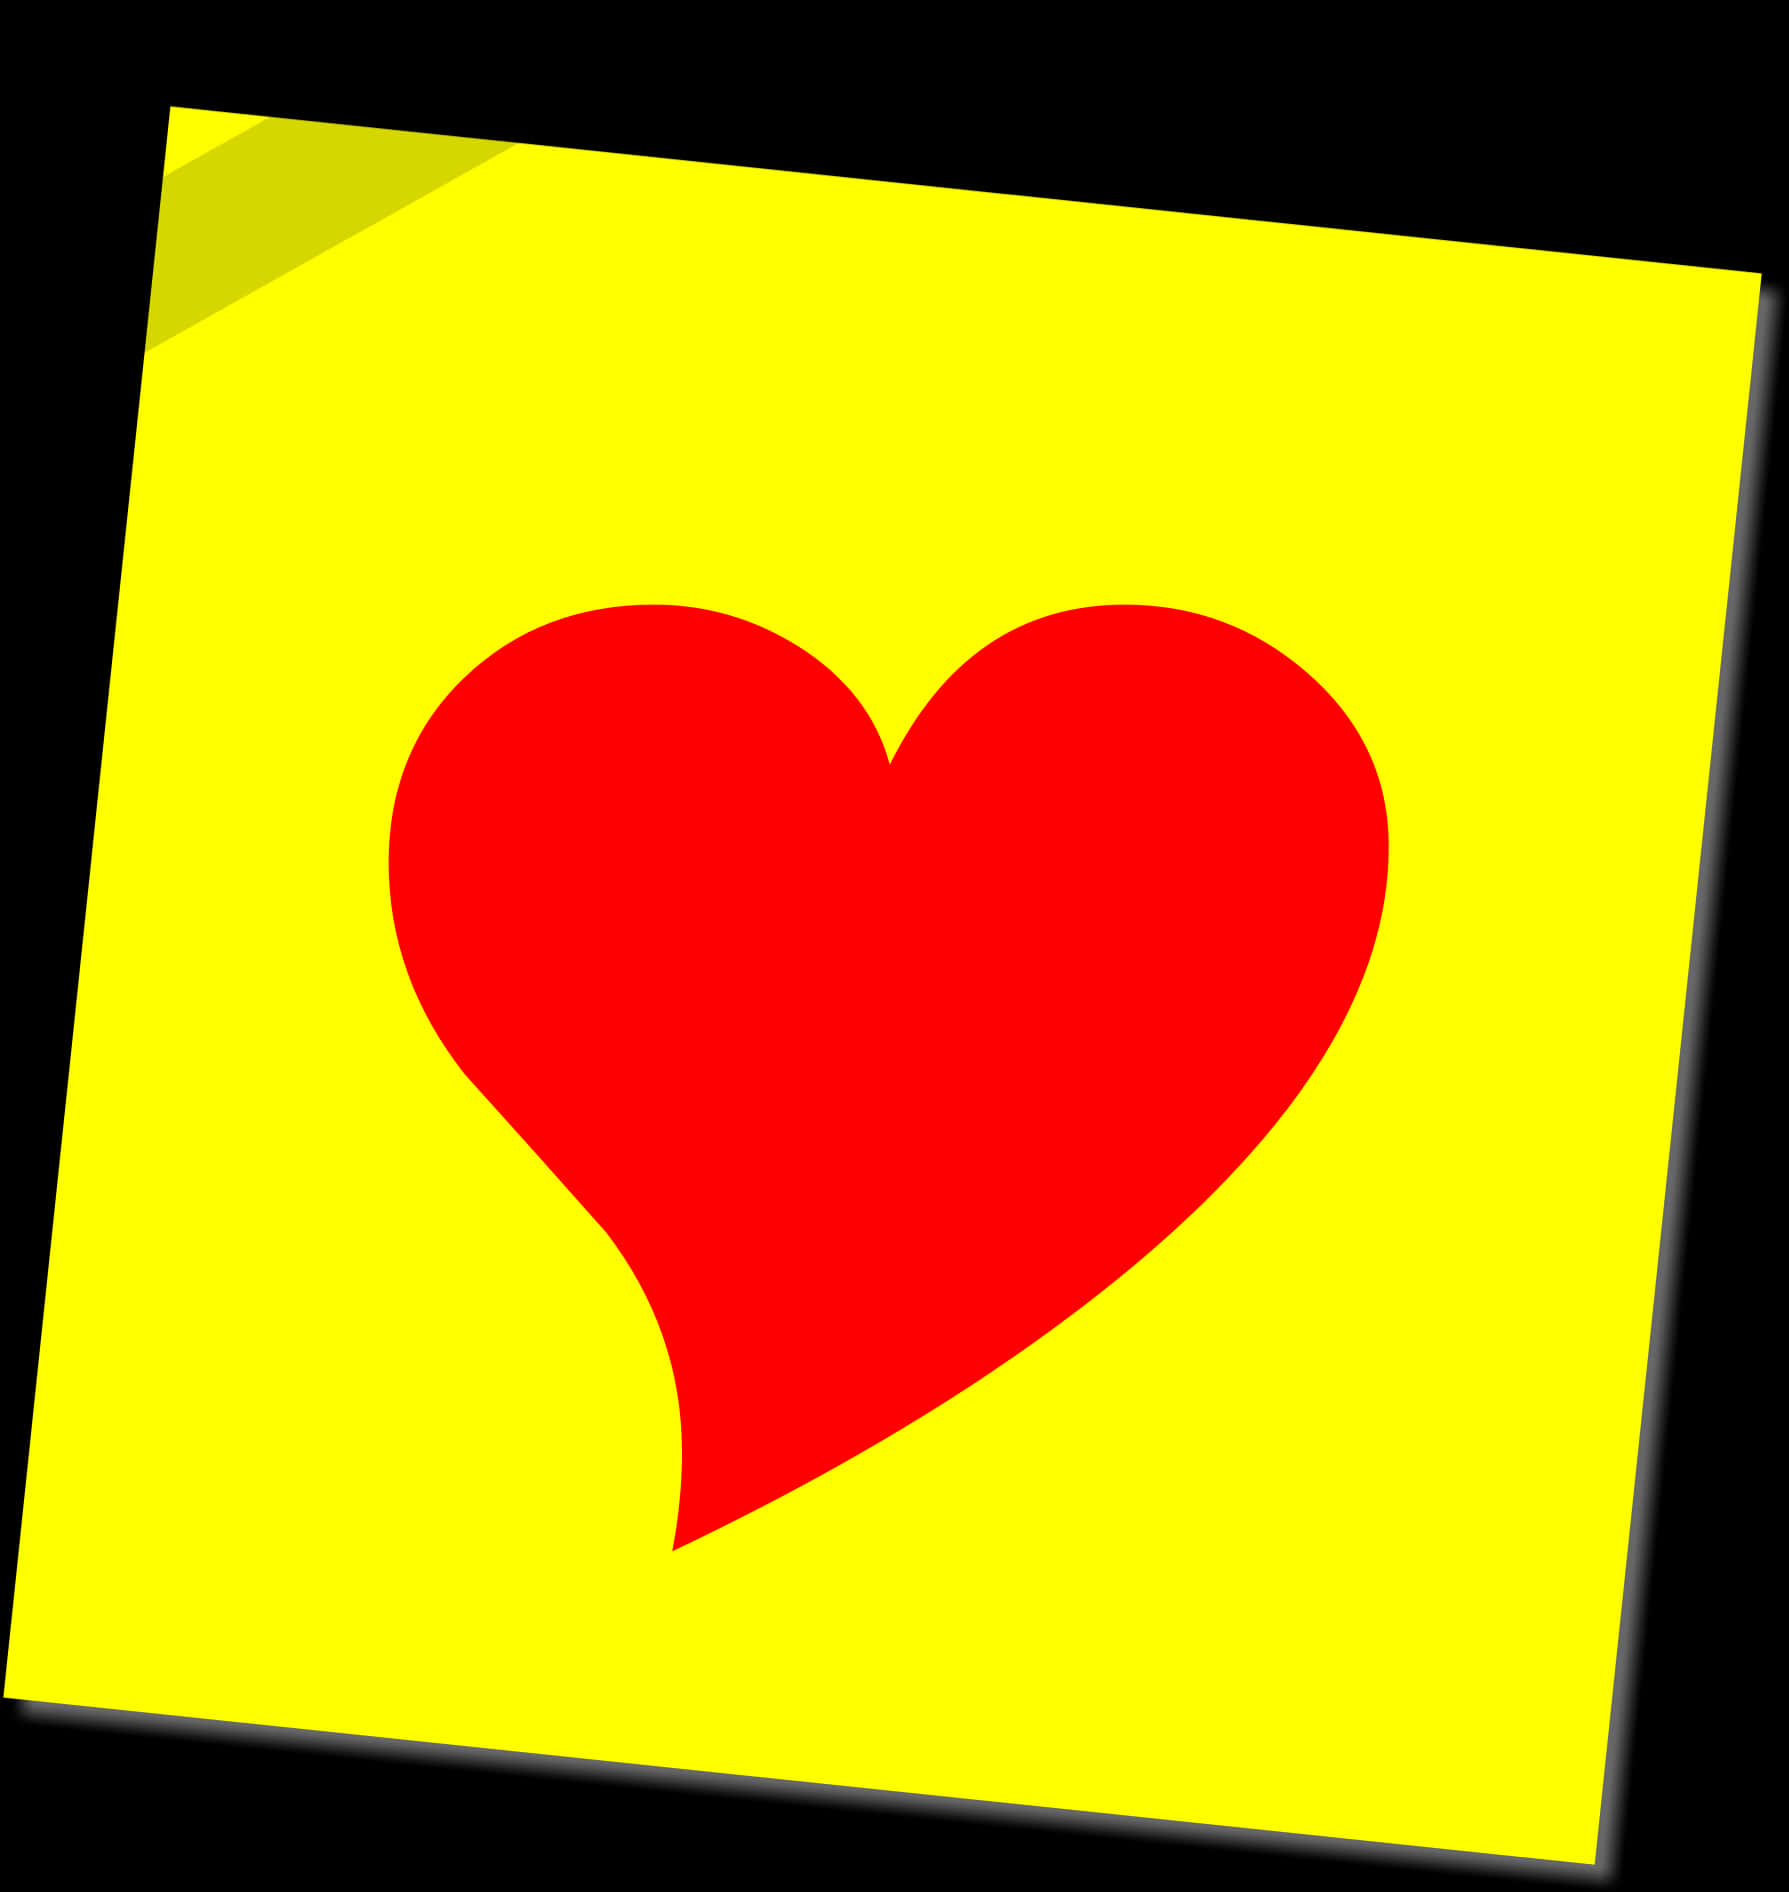 Love Note Sticky Heart Graphic